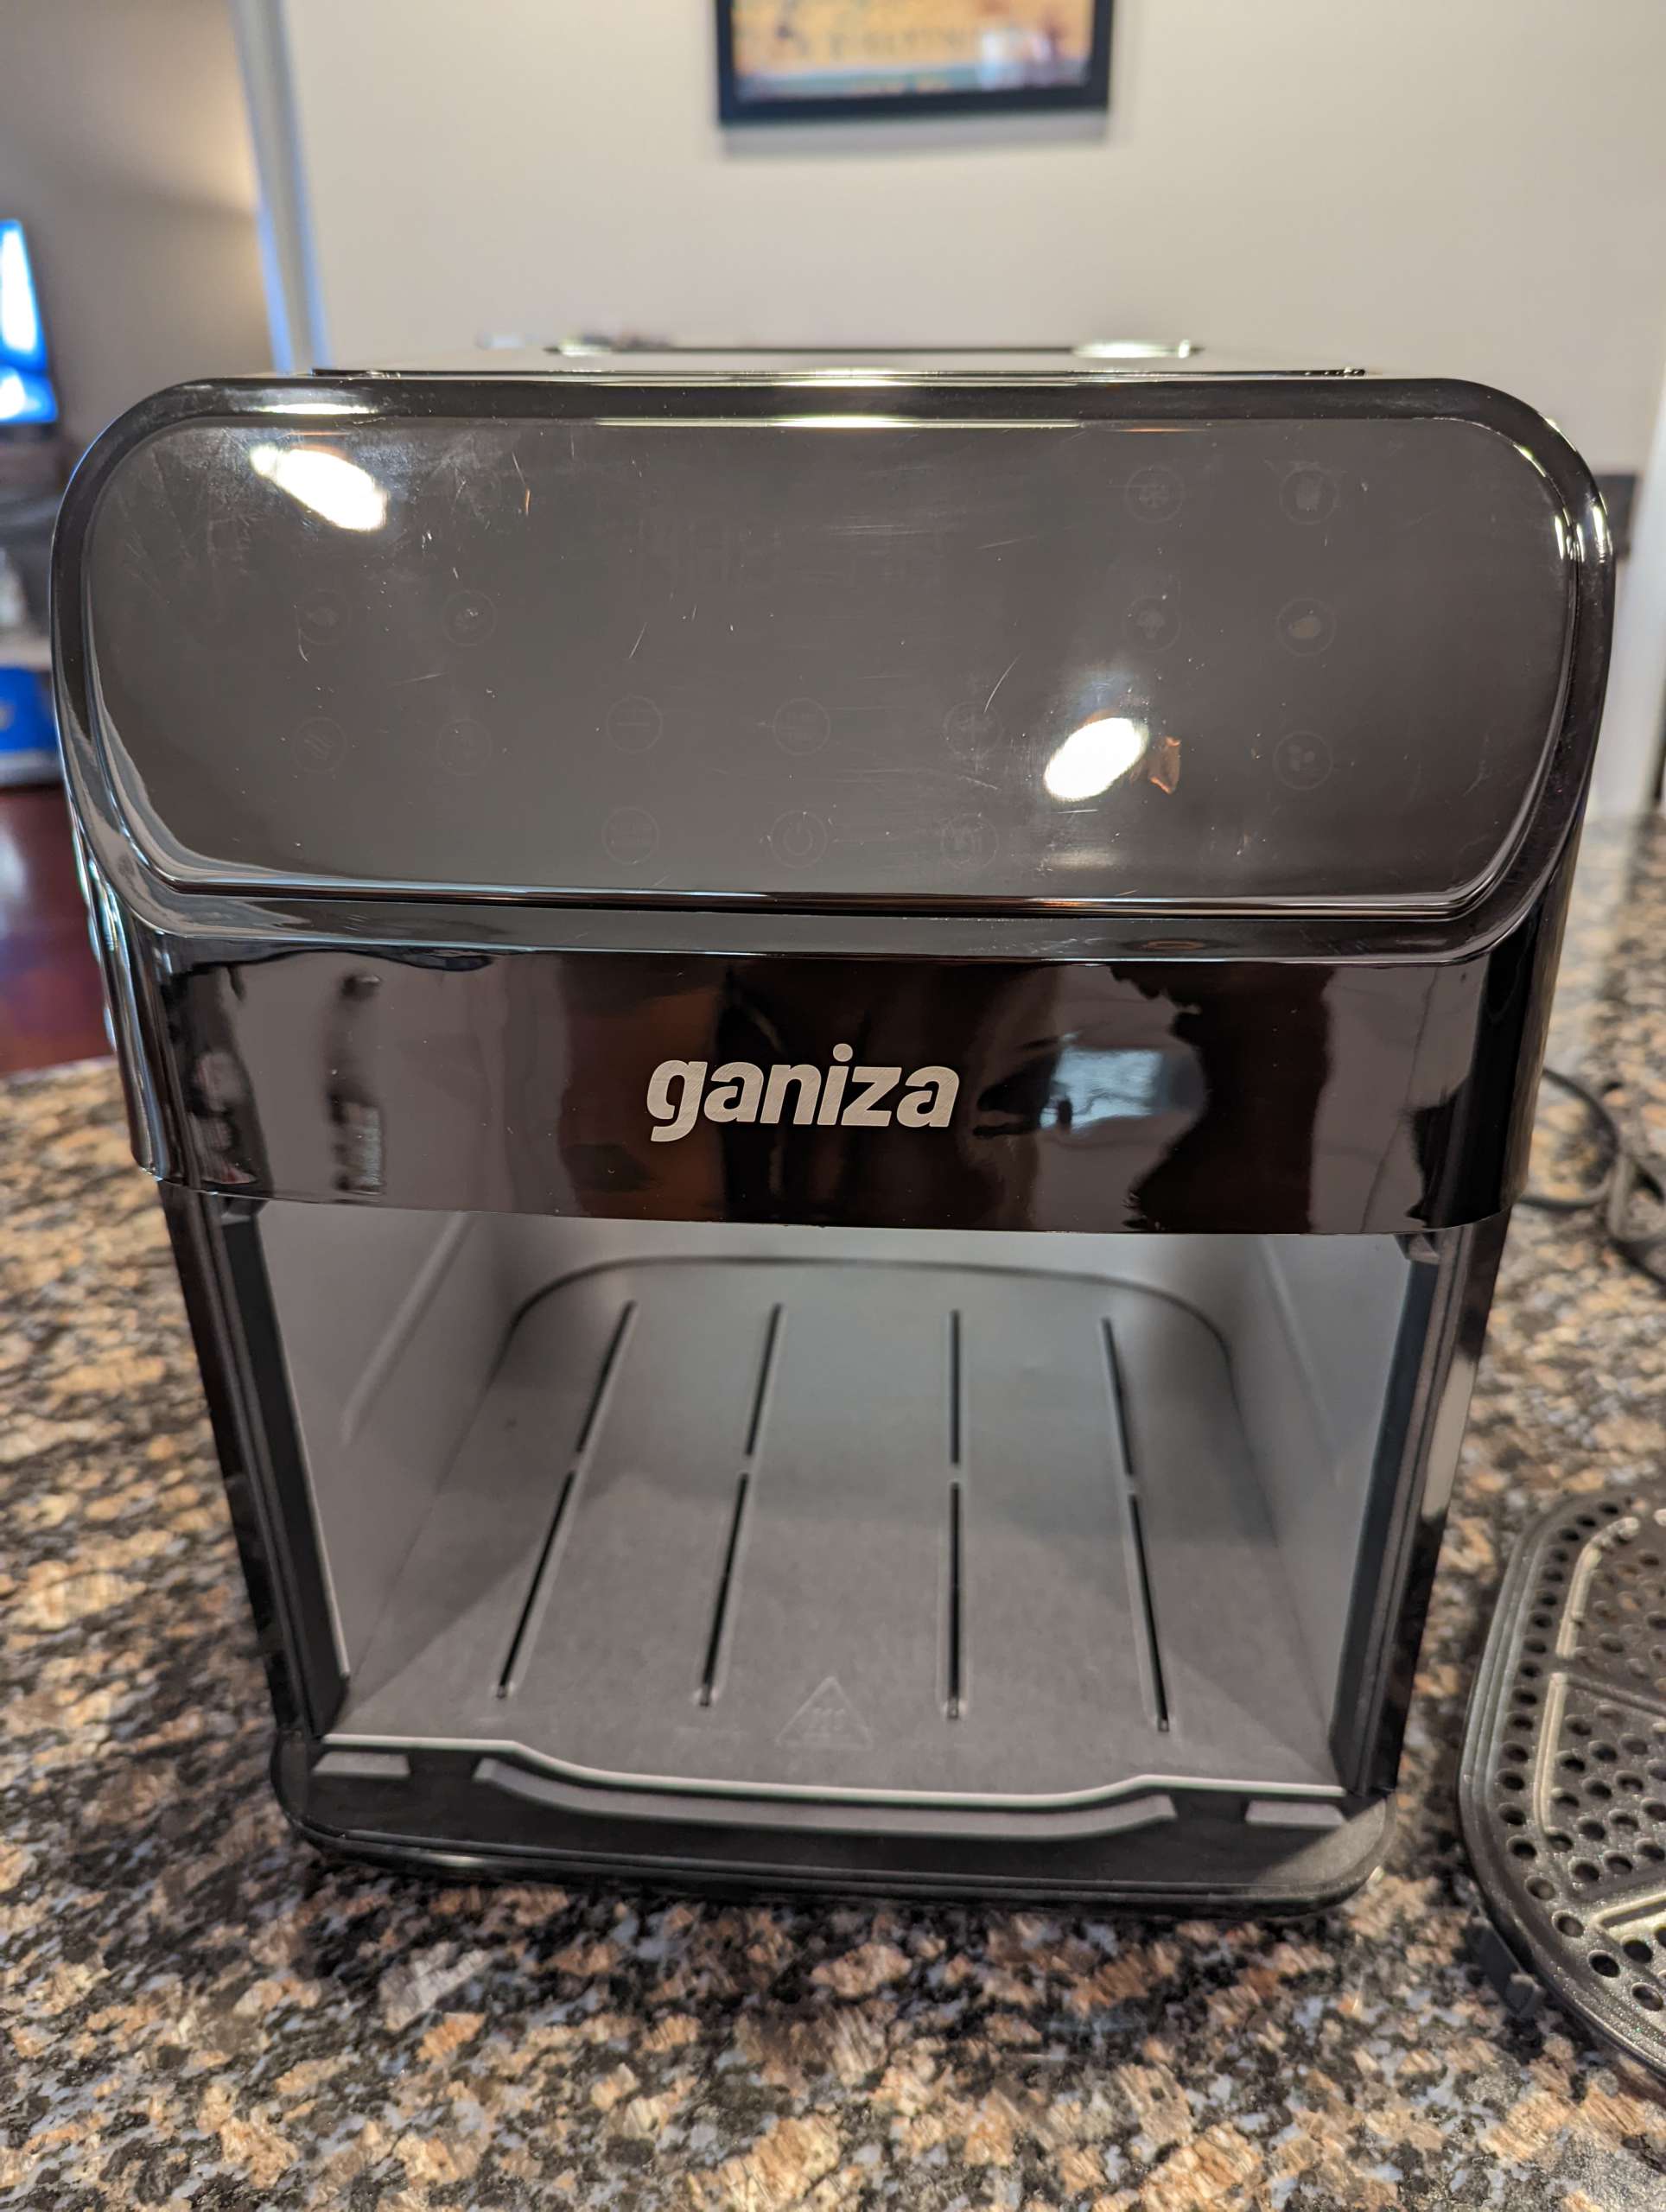 Adventures in Air Frying: SARKI 12 qt. Air Fryer Review